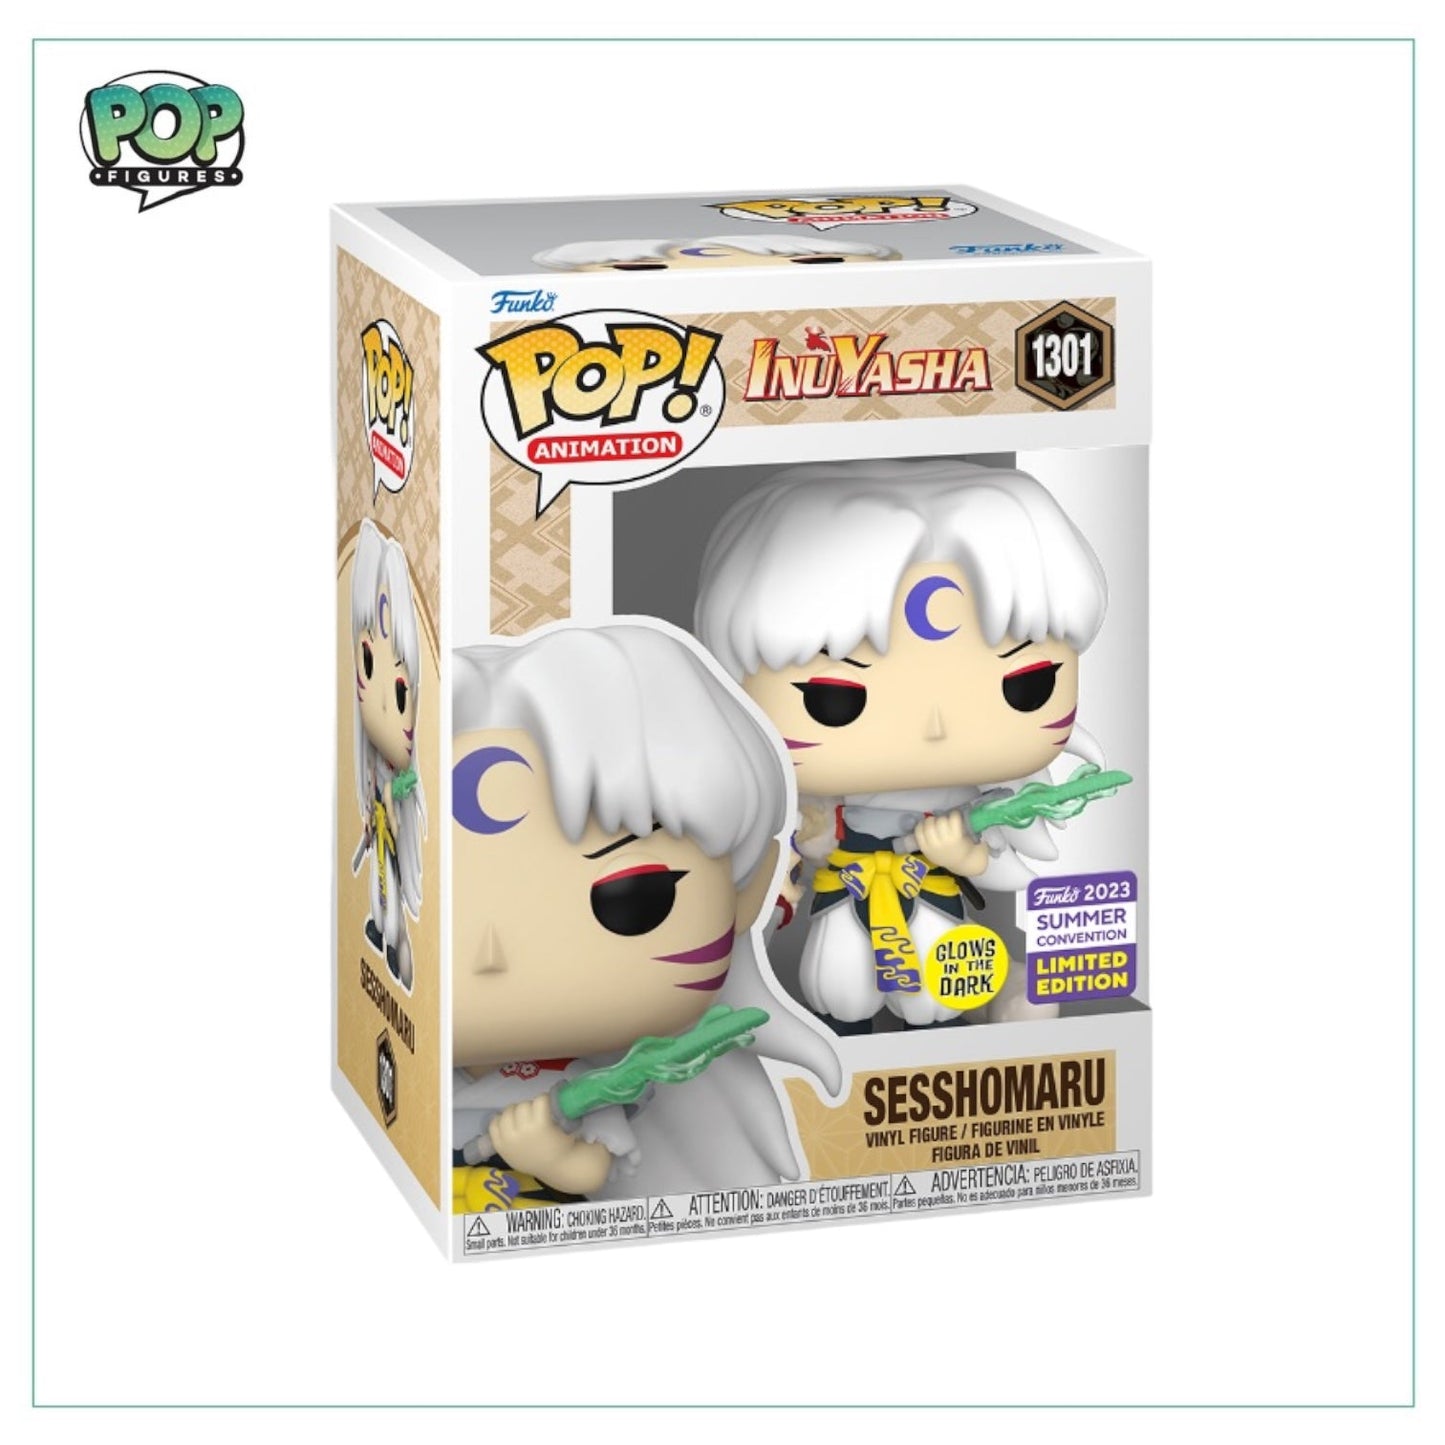 Sesshomaru #1301 (Glows in the Dark) Funko Pop! - Inuyasha - SDCC 2023 Shared Exclusive - Angry Cat